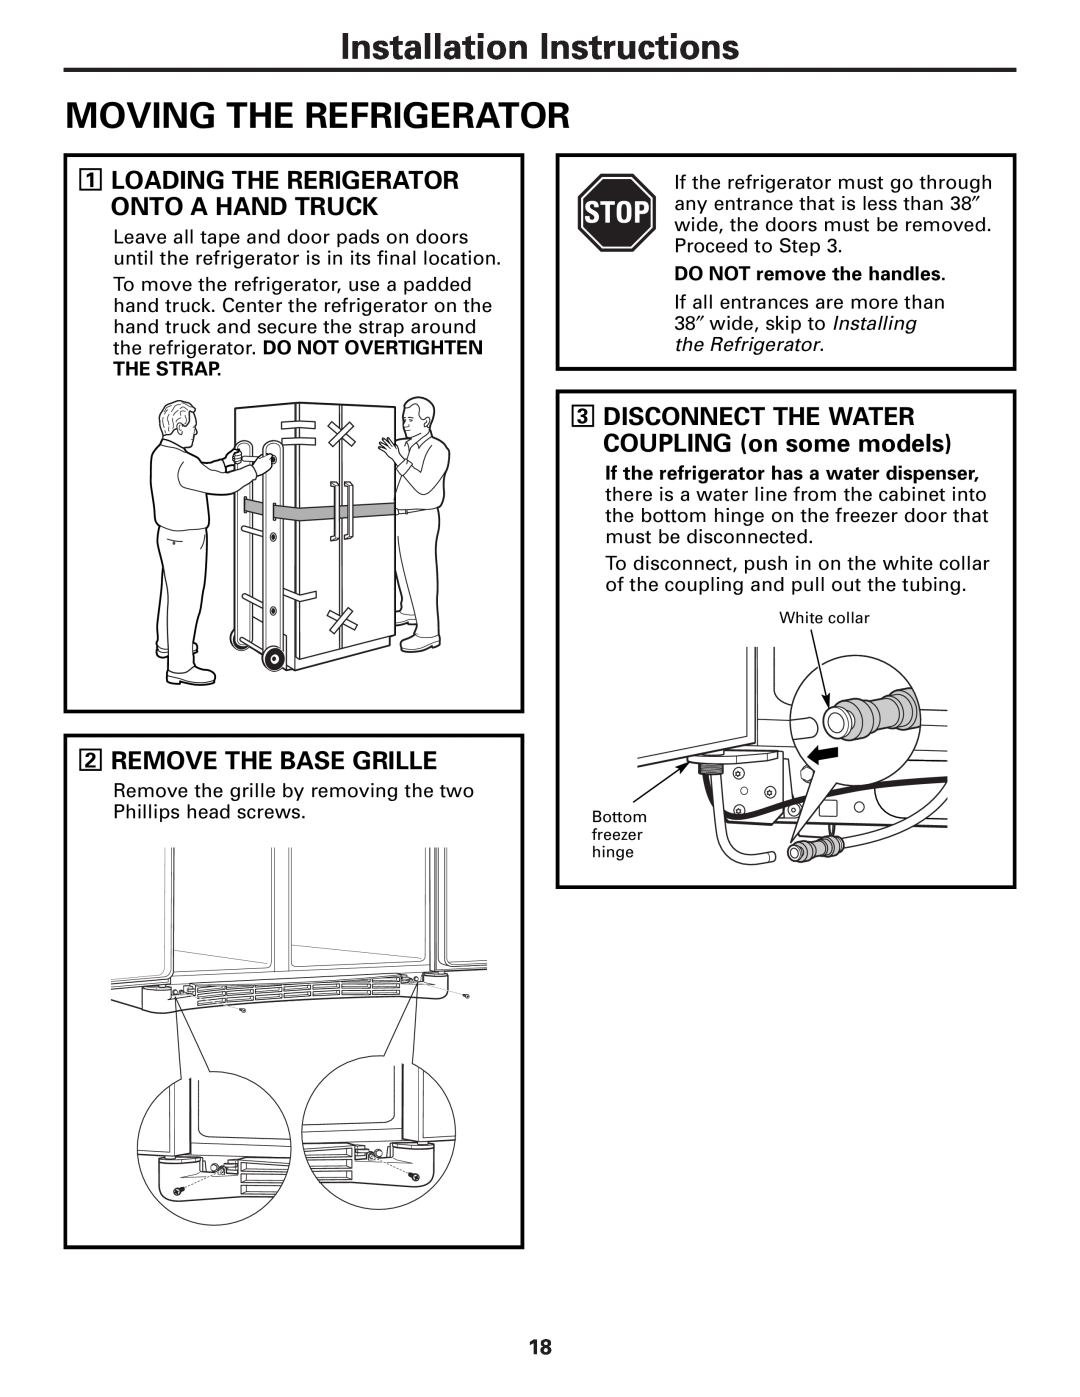 GE MODELS 23 AND 25 Installation Instructions MOVING THE REFRIGERATOR, Remove The Base Grille, The Strap 